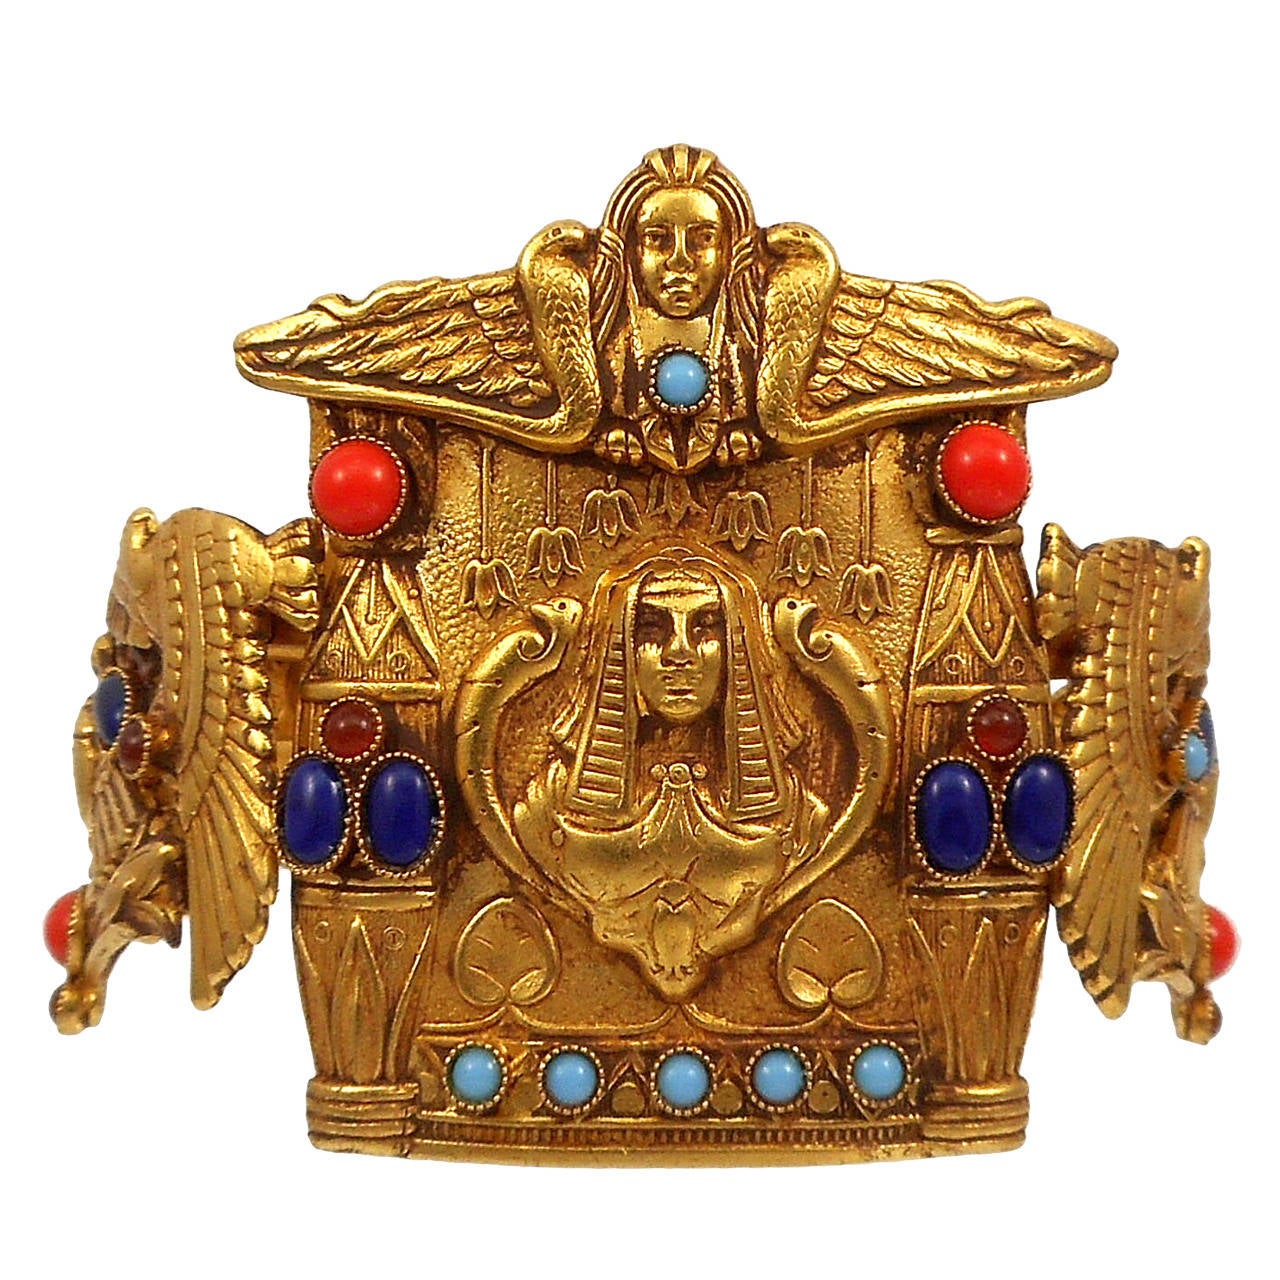 Askew London 'Egyptian Revival' Cleopatra and Falcon Cuff Bracelet